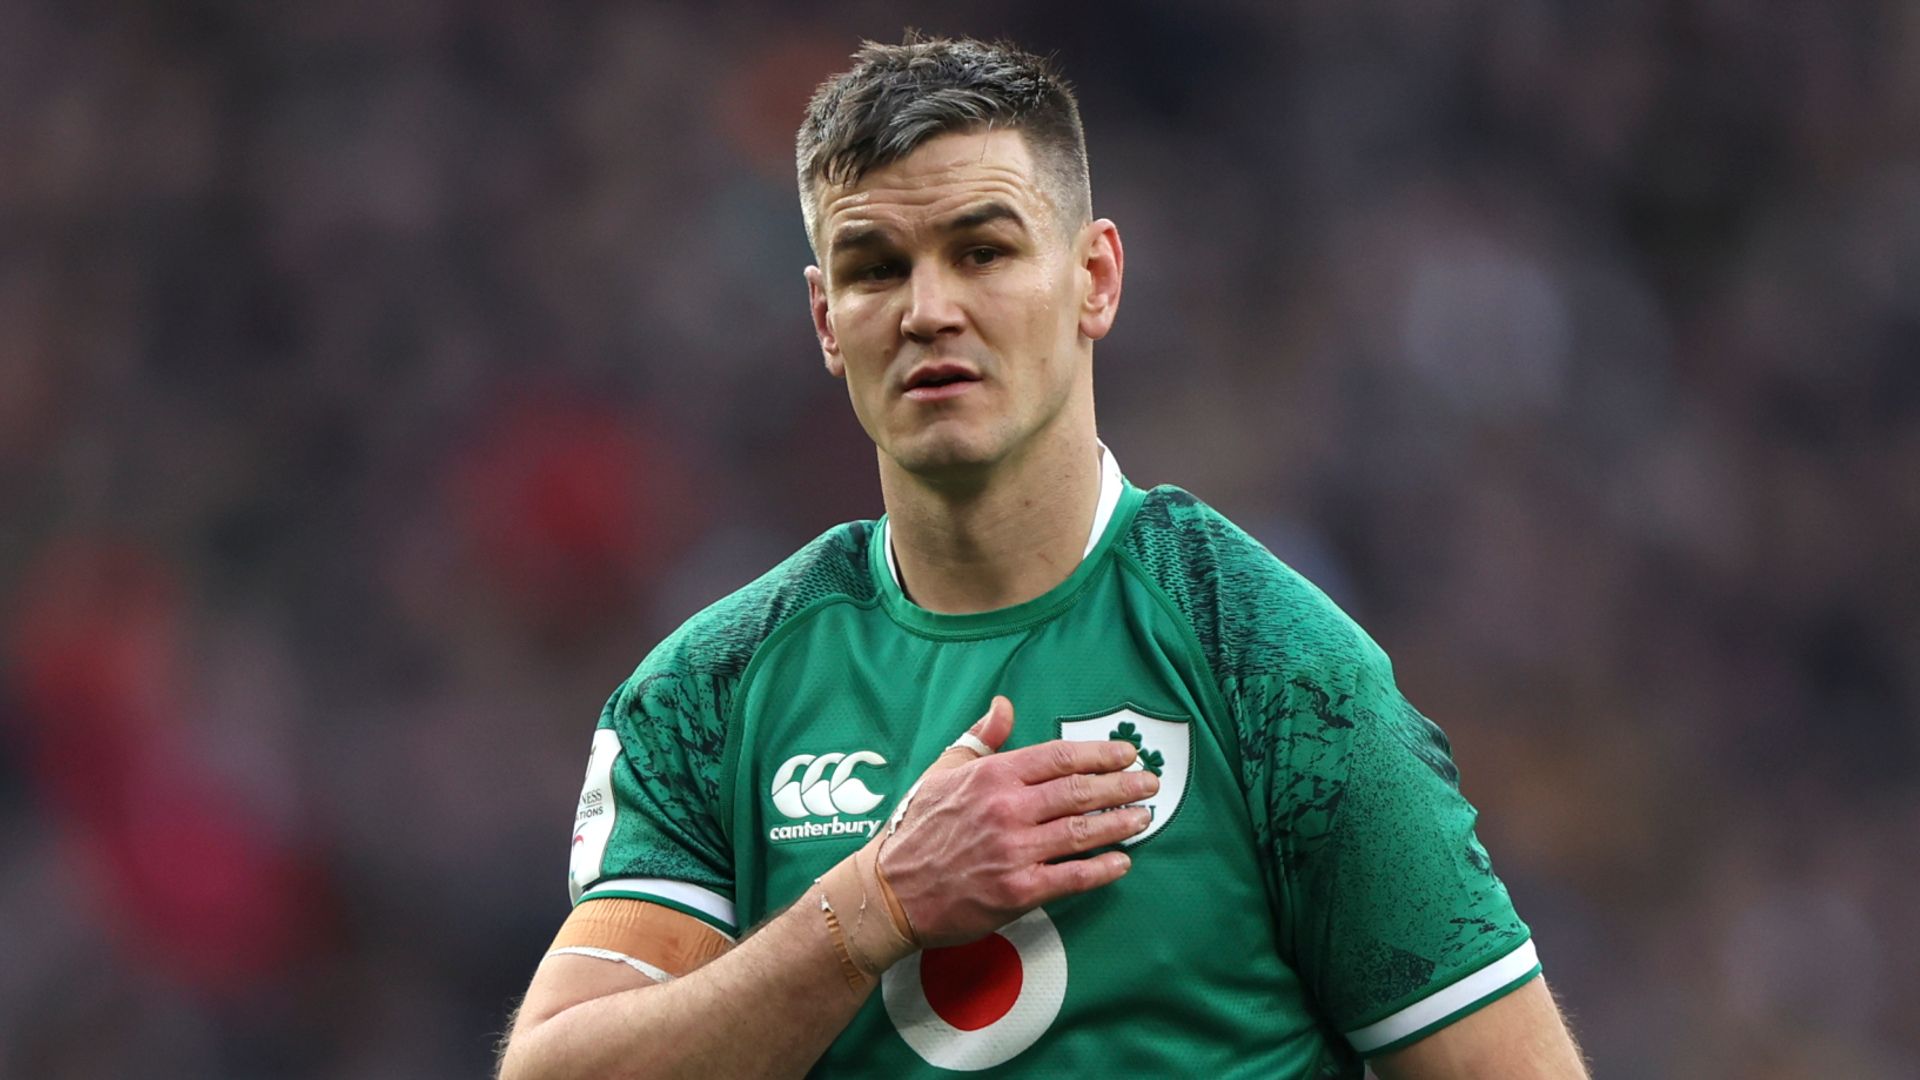 Sexton: Ireland must keep evolving with World Cup on horizon